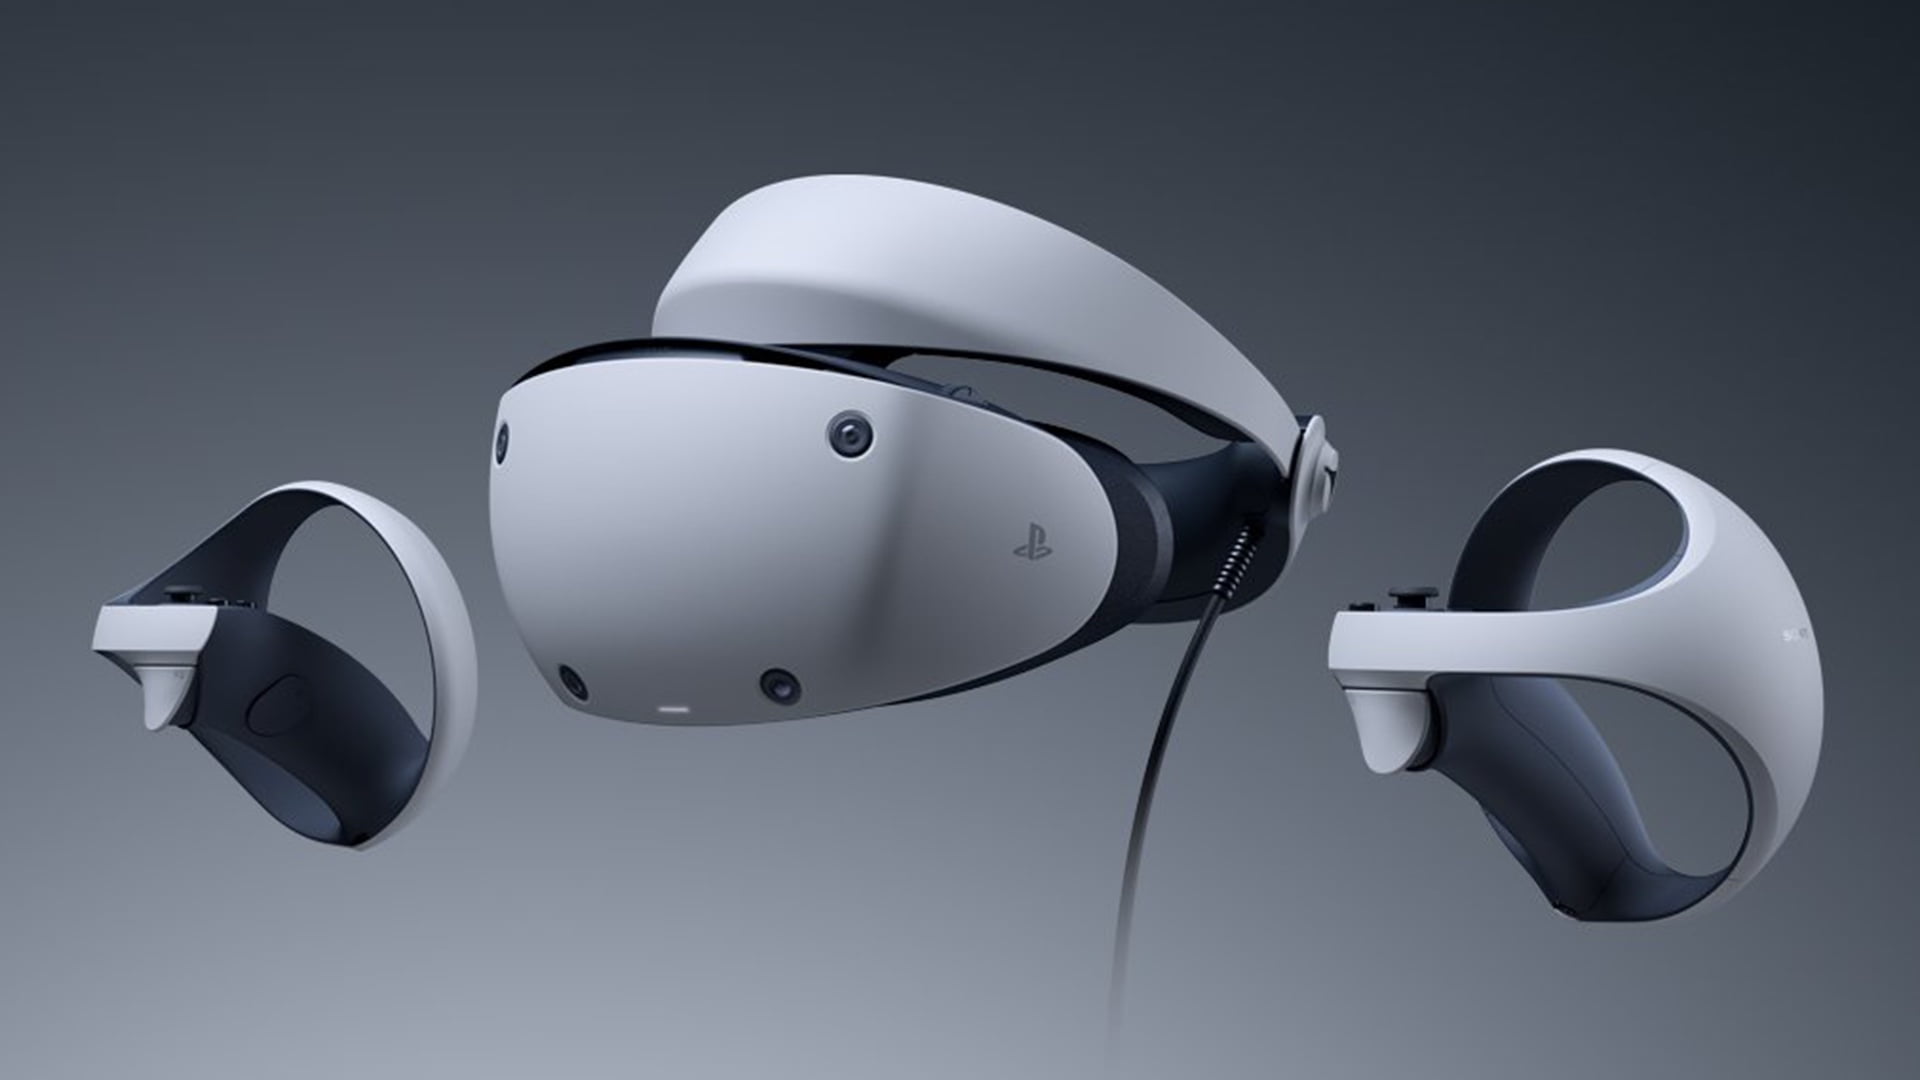 The Playstation VR 3 probably won't be released until 2030 - what does that mean for VR?